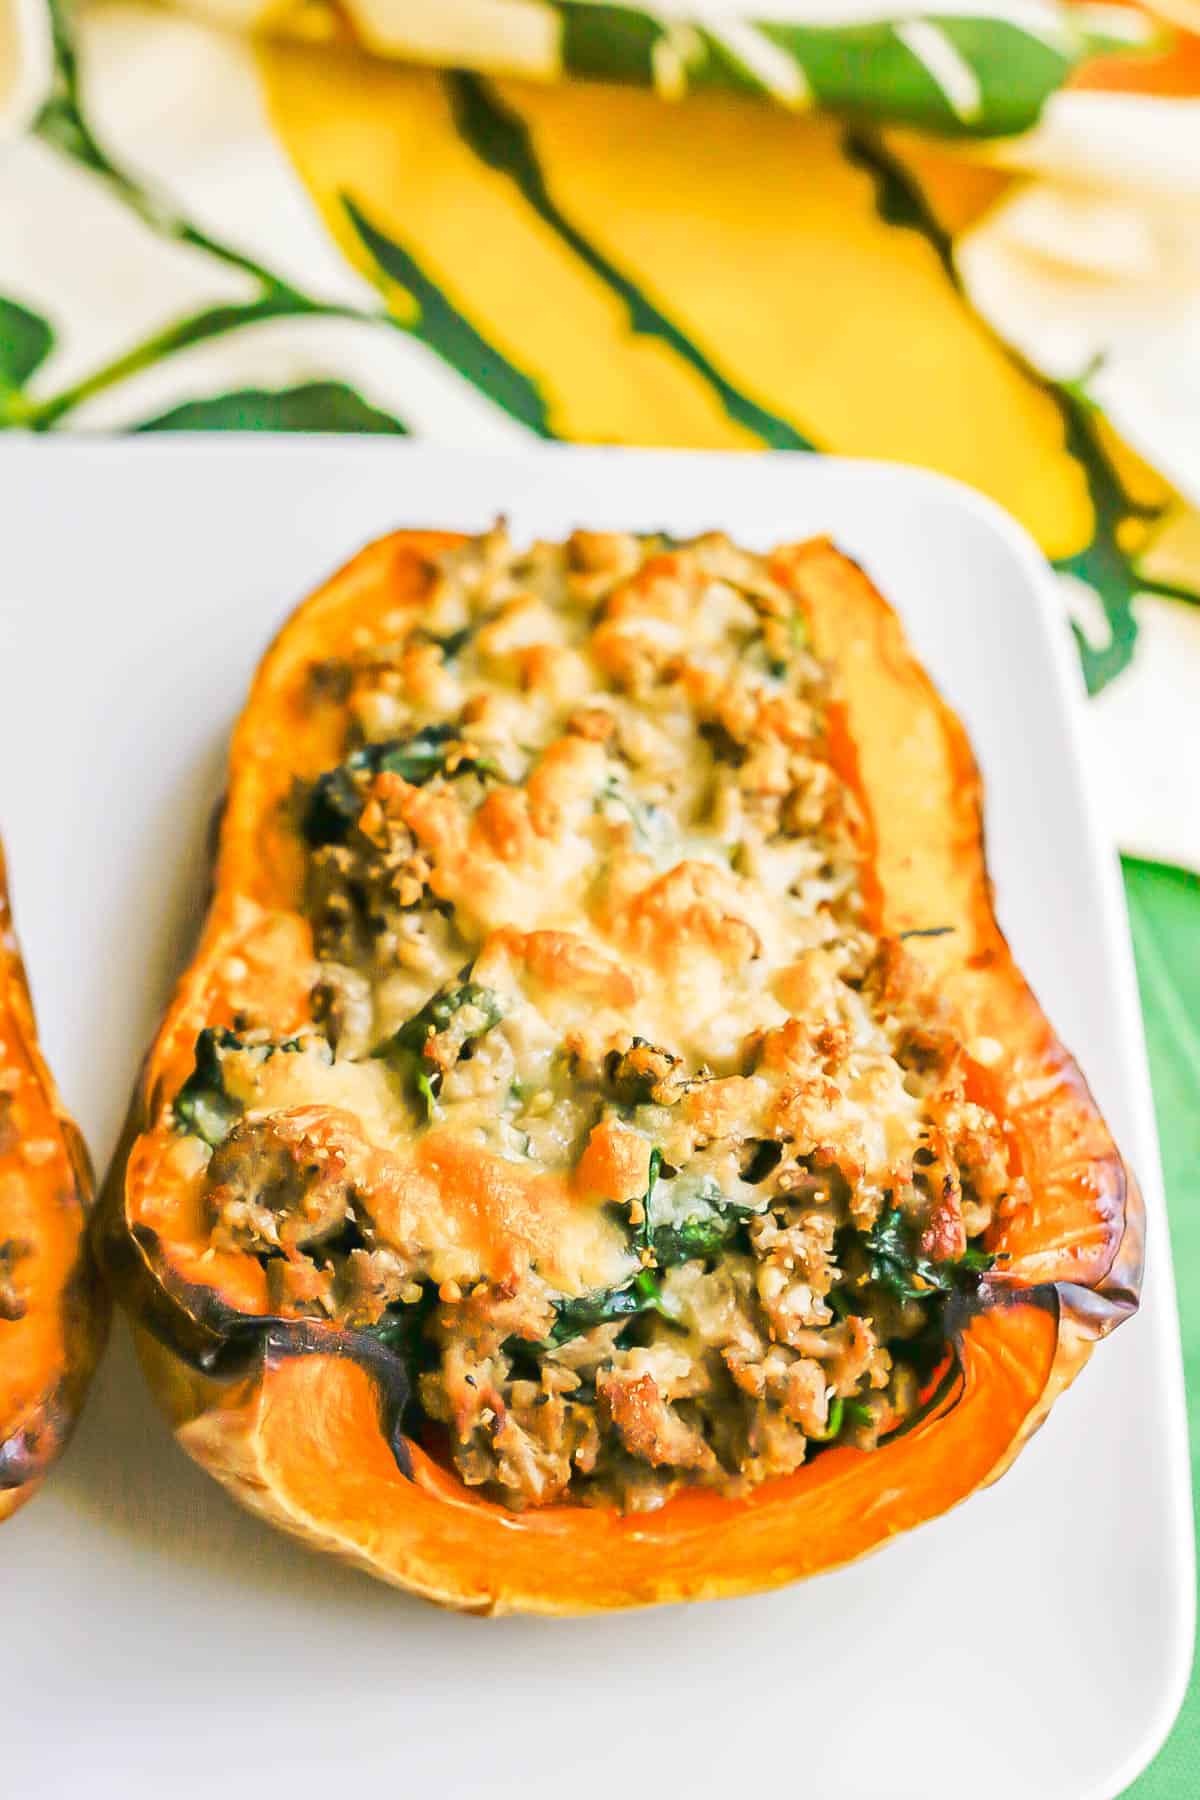 Angled view of a butternut squash half with a turkey sausage and spinach mixture topped with melted, browned Parmesan cheese.